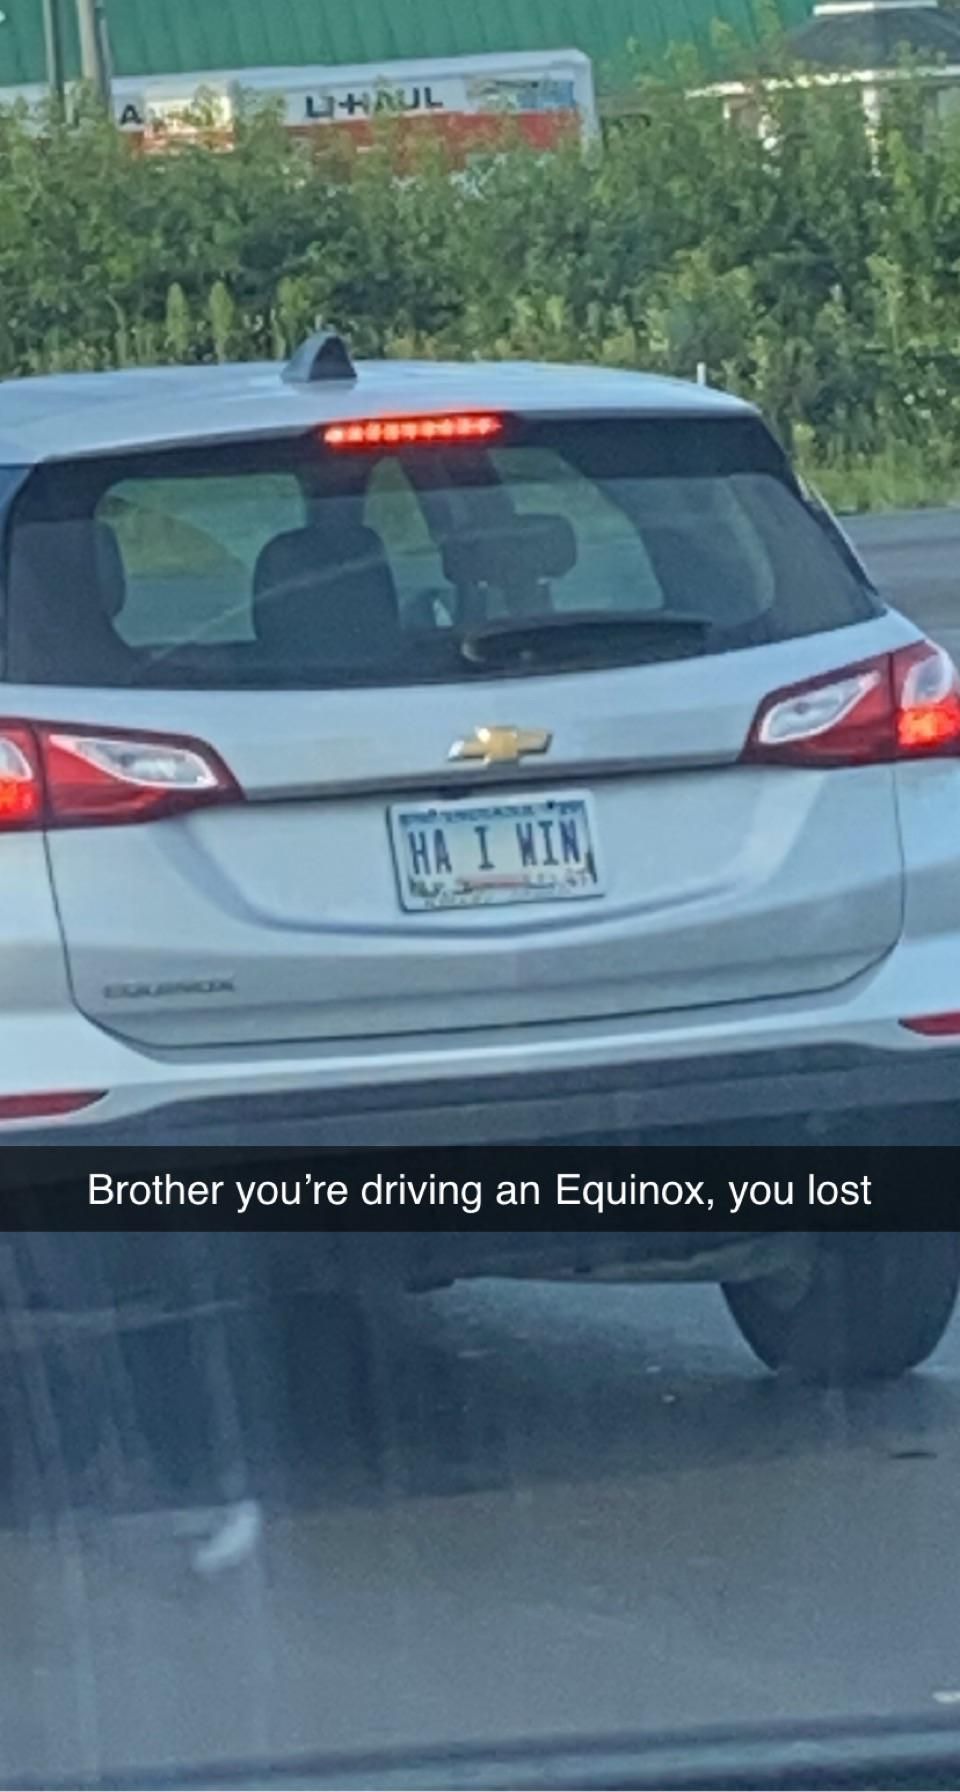 Came across this plate on my way to work